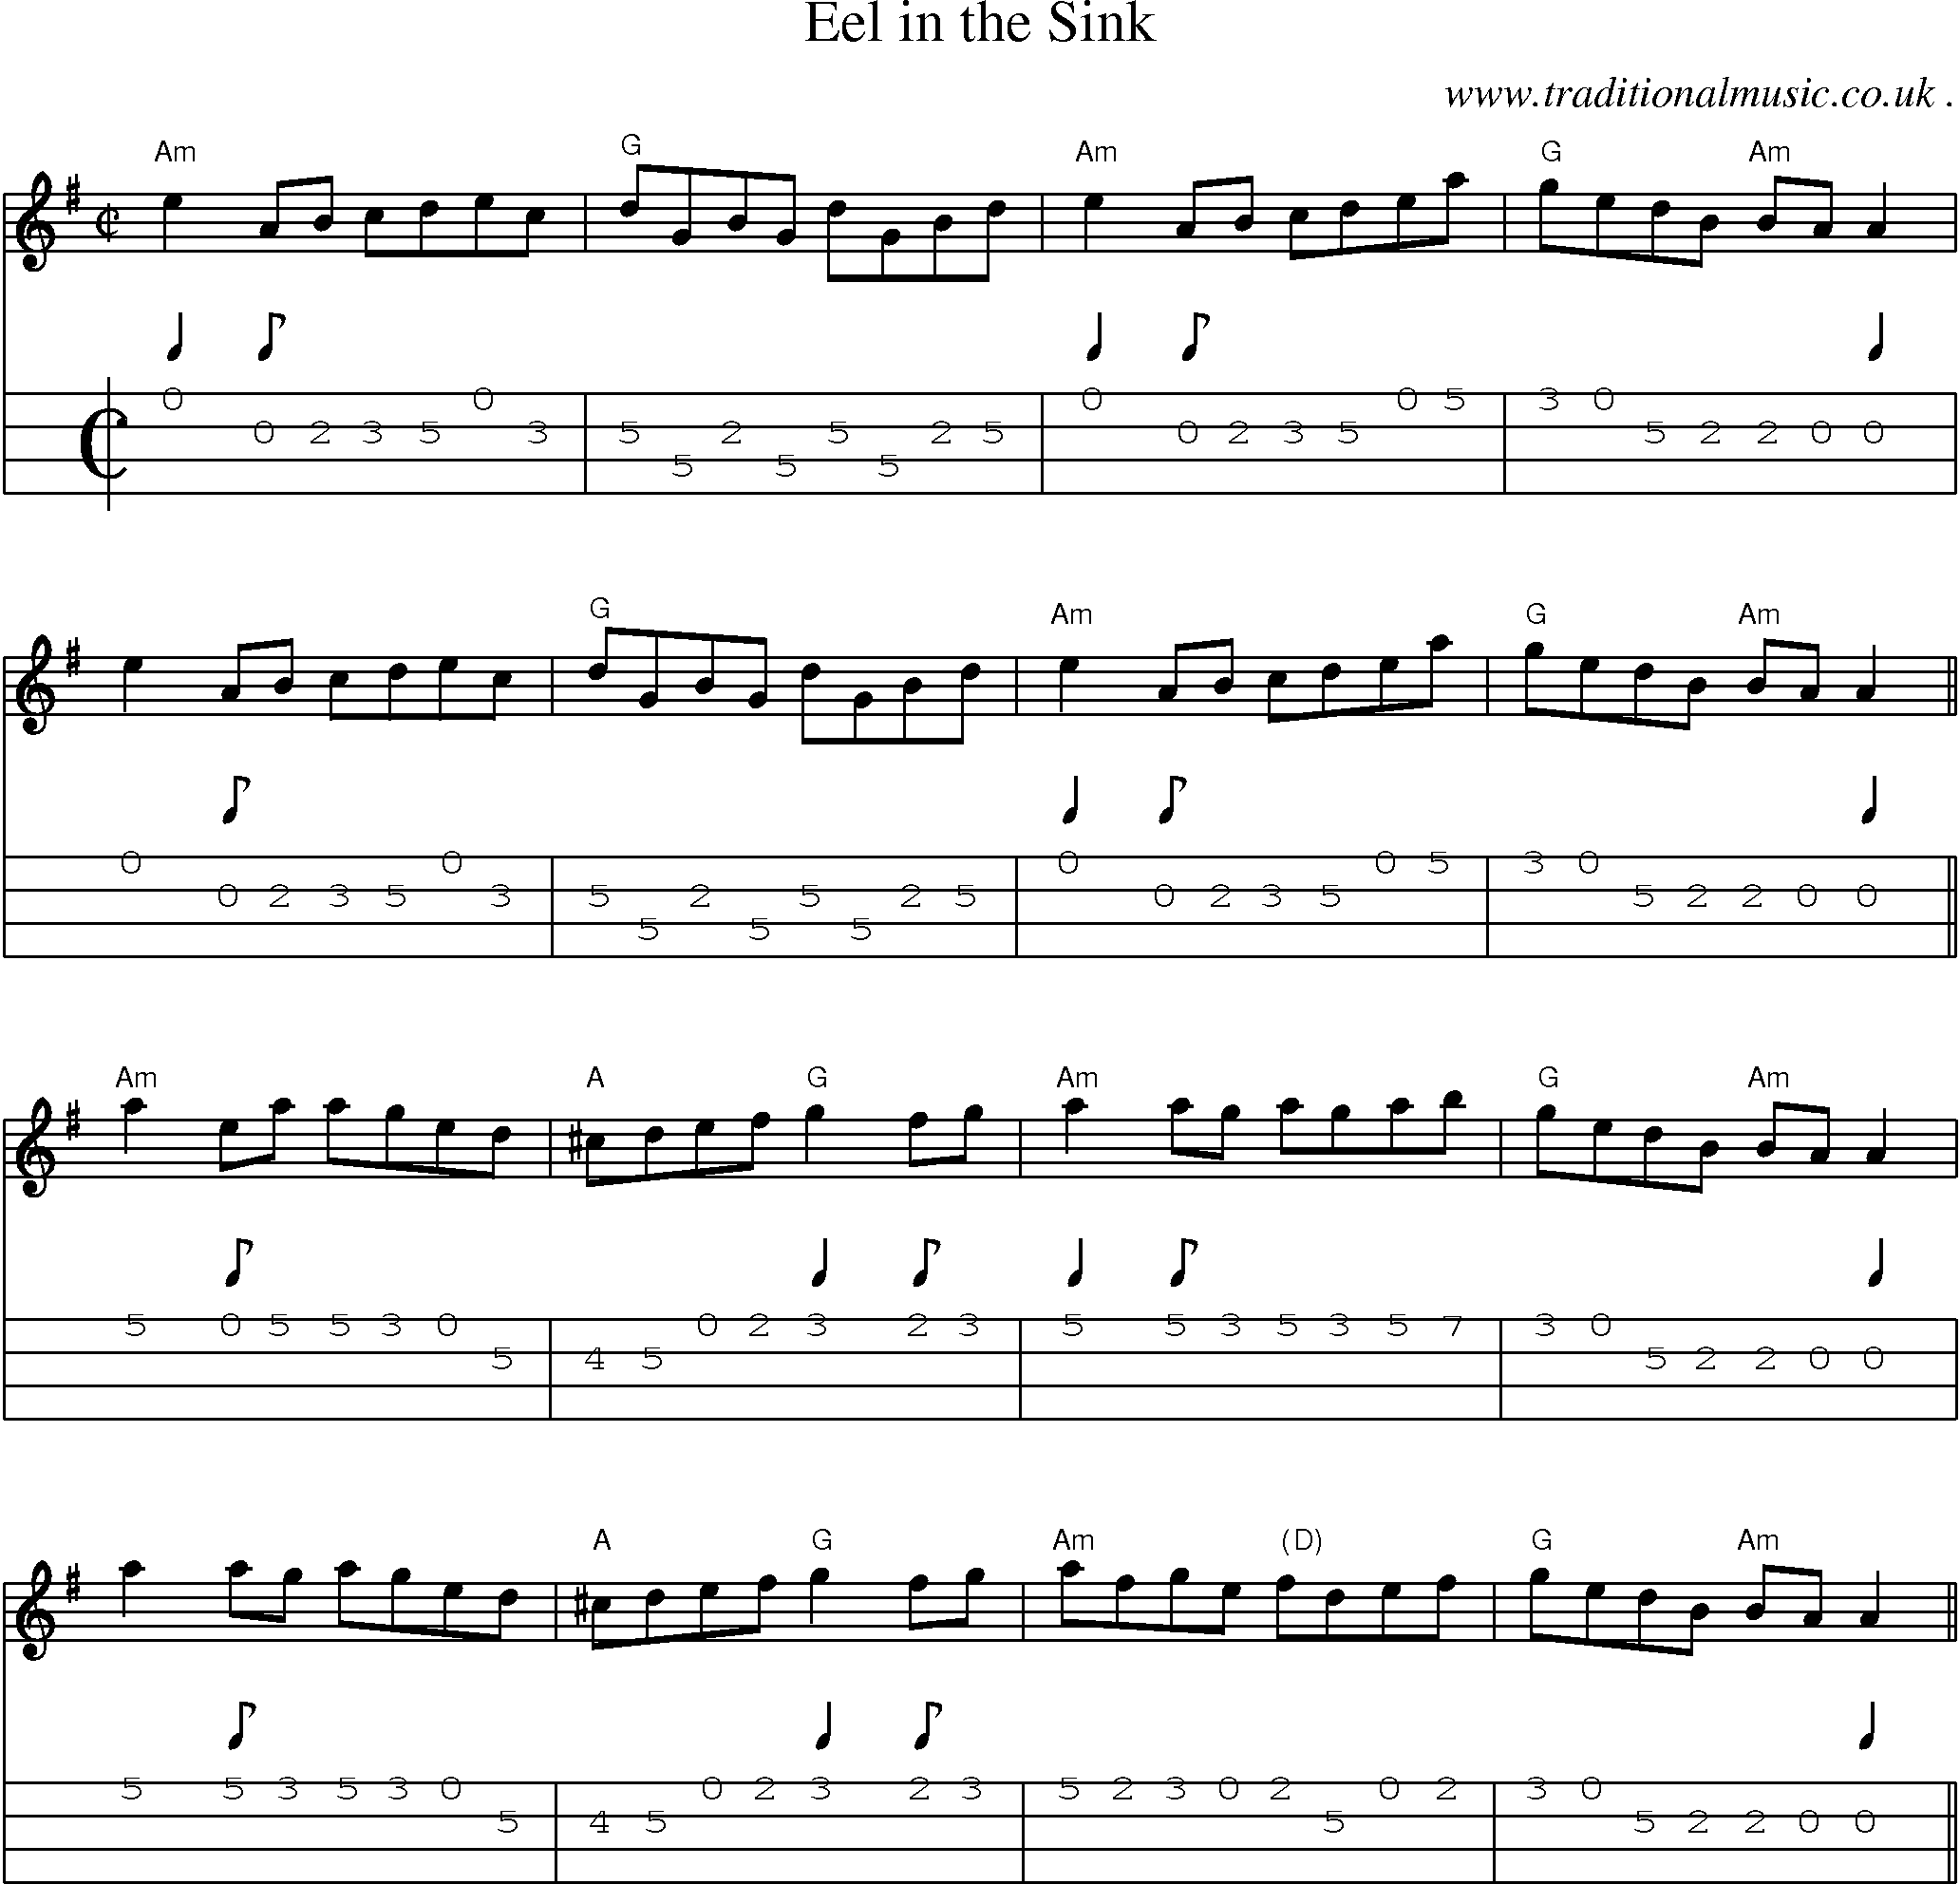 Music Score and Guitar Tabs for Eel In The Sink